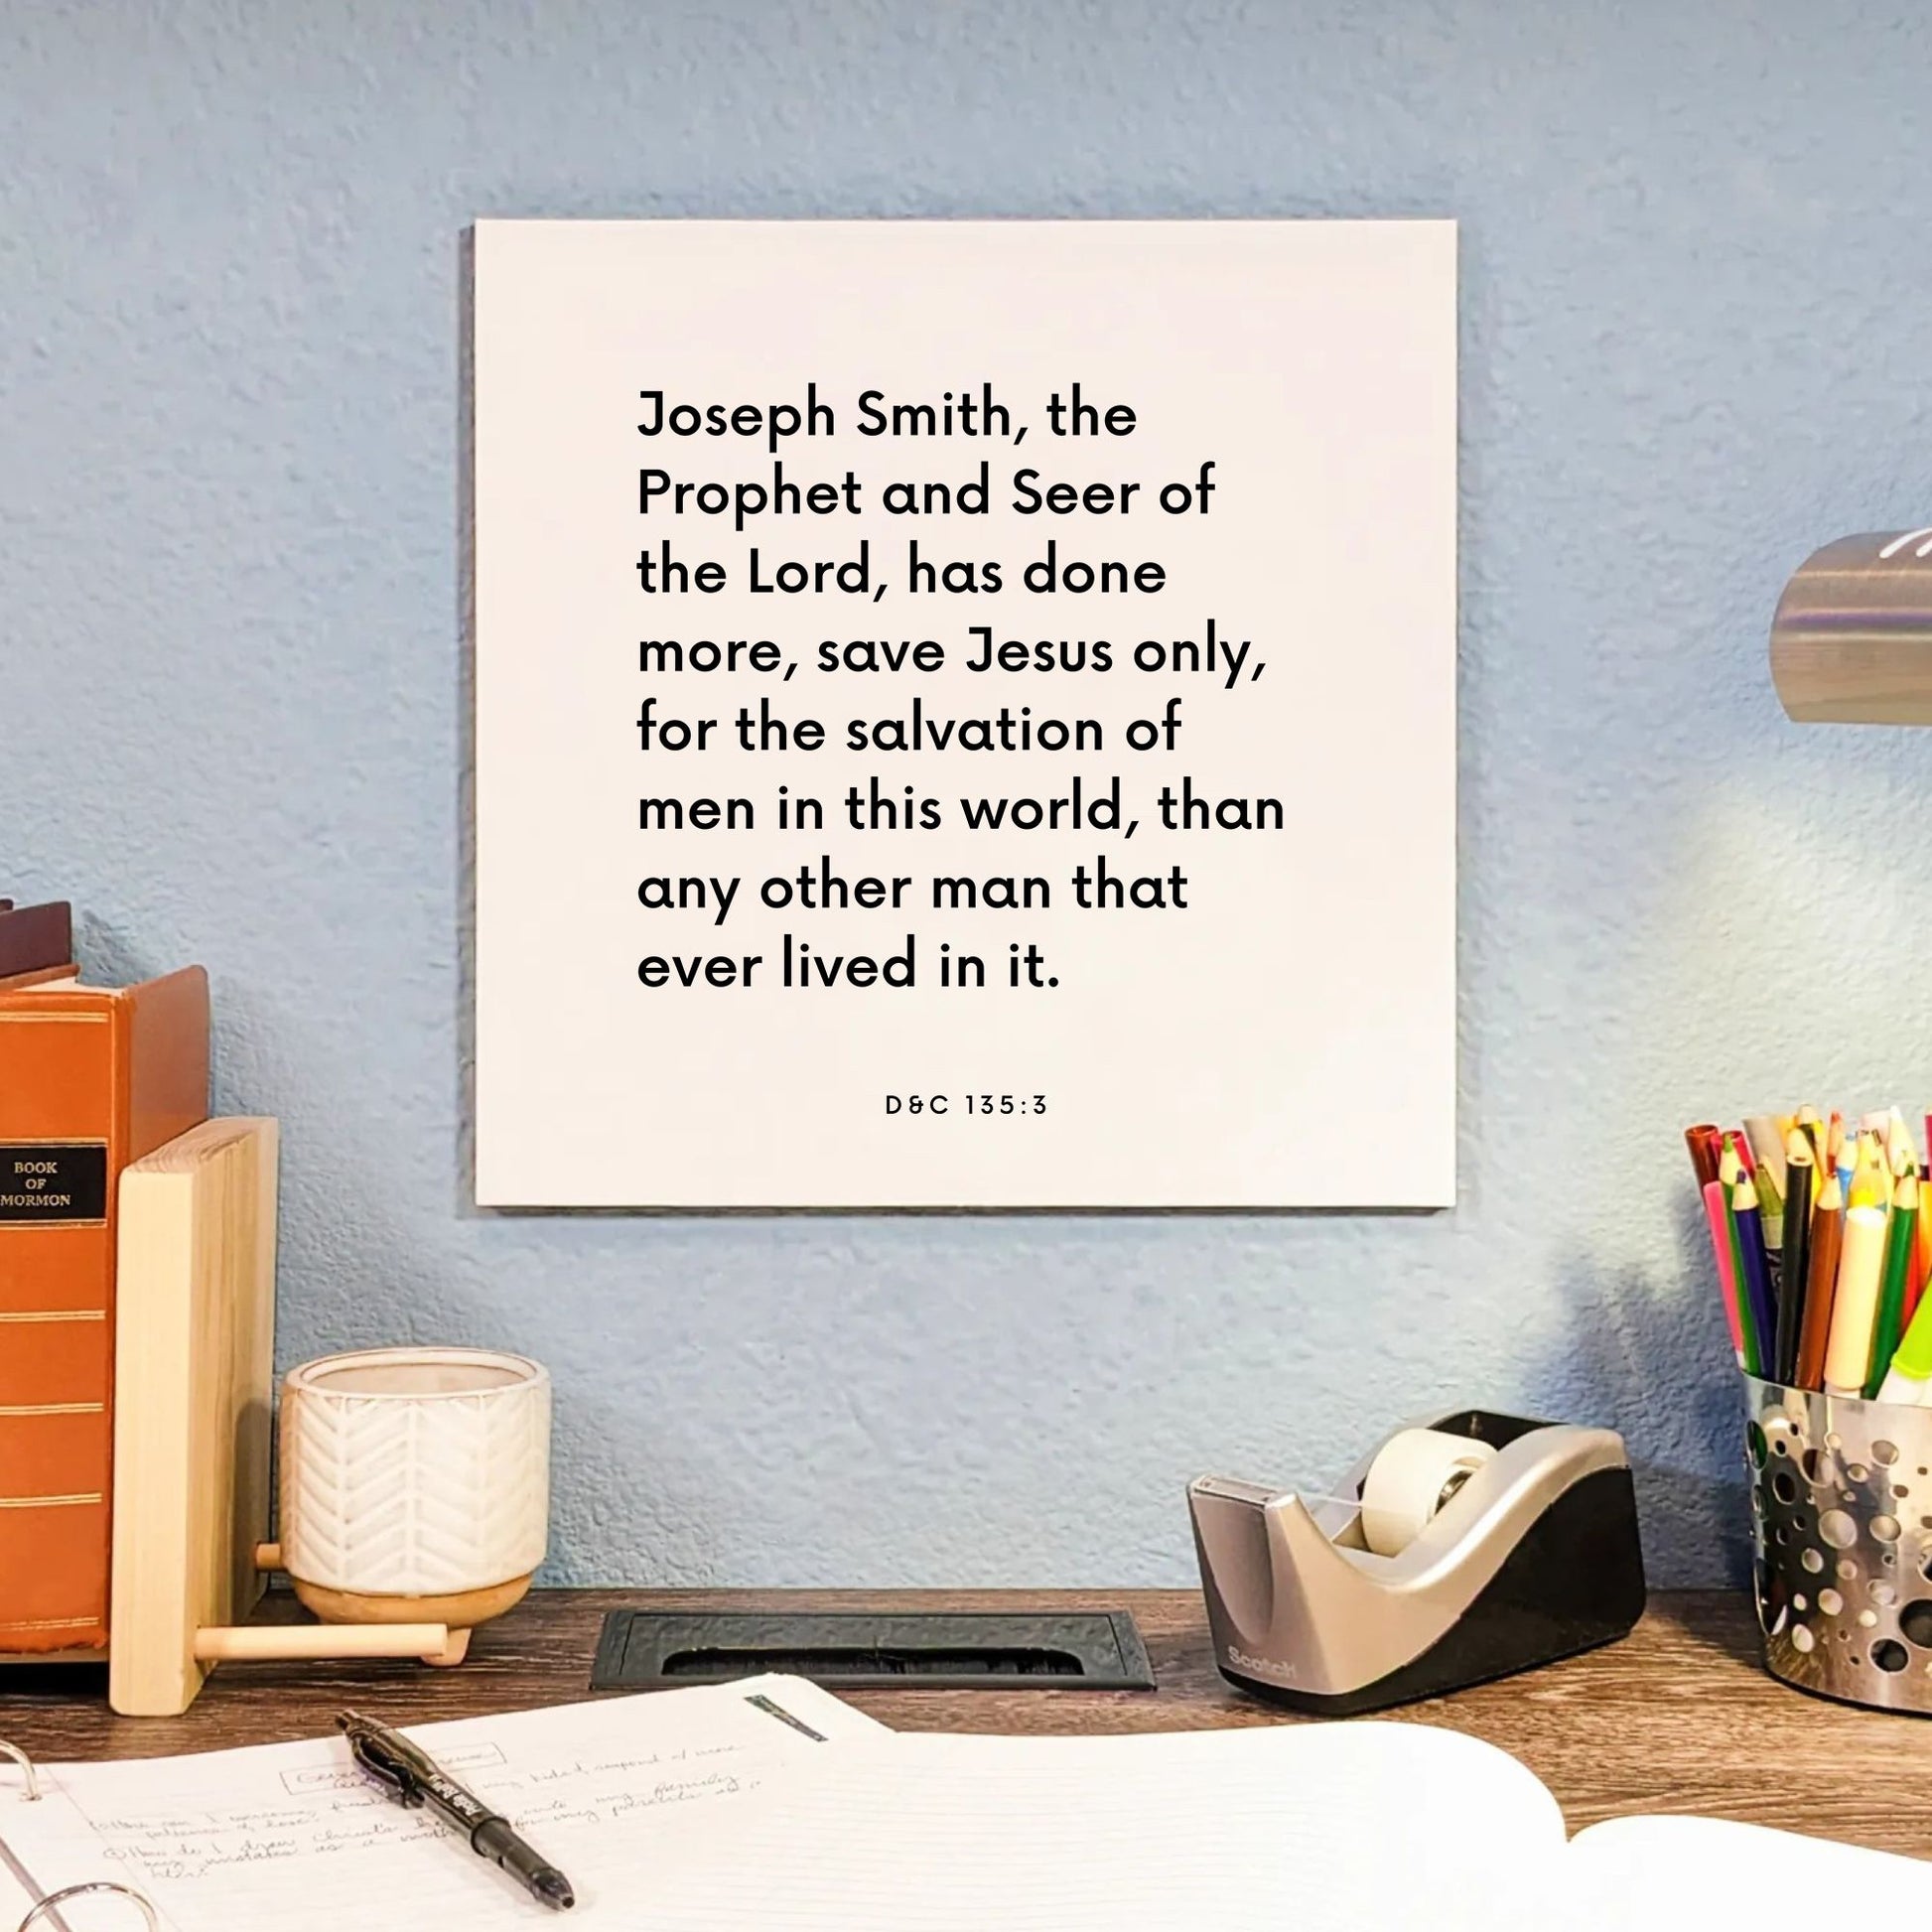 Desk mouting of the scripture tile for D&C 135:3 - "Joseph Smith, the Prophet and Seer of the Lord"